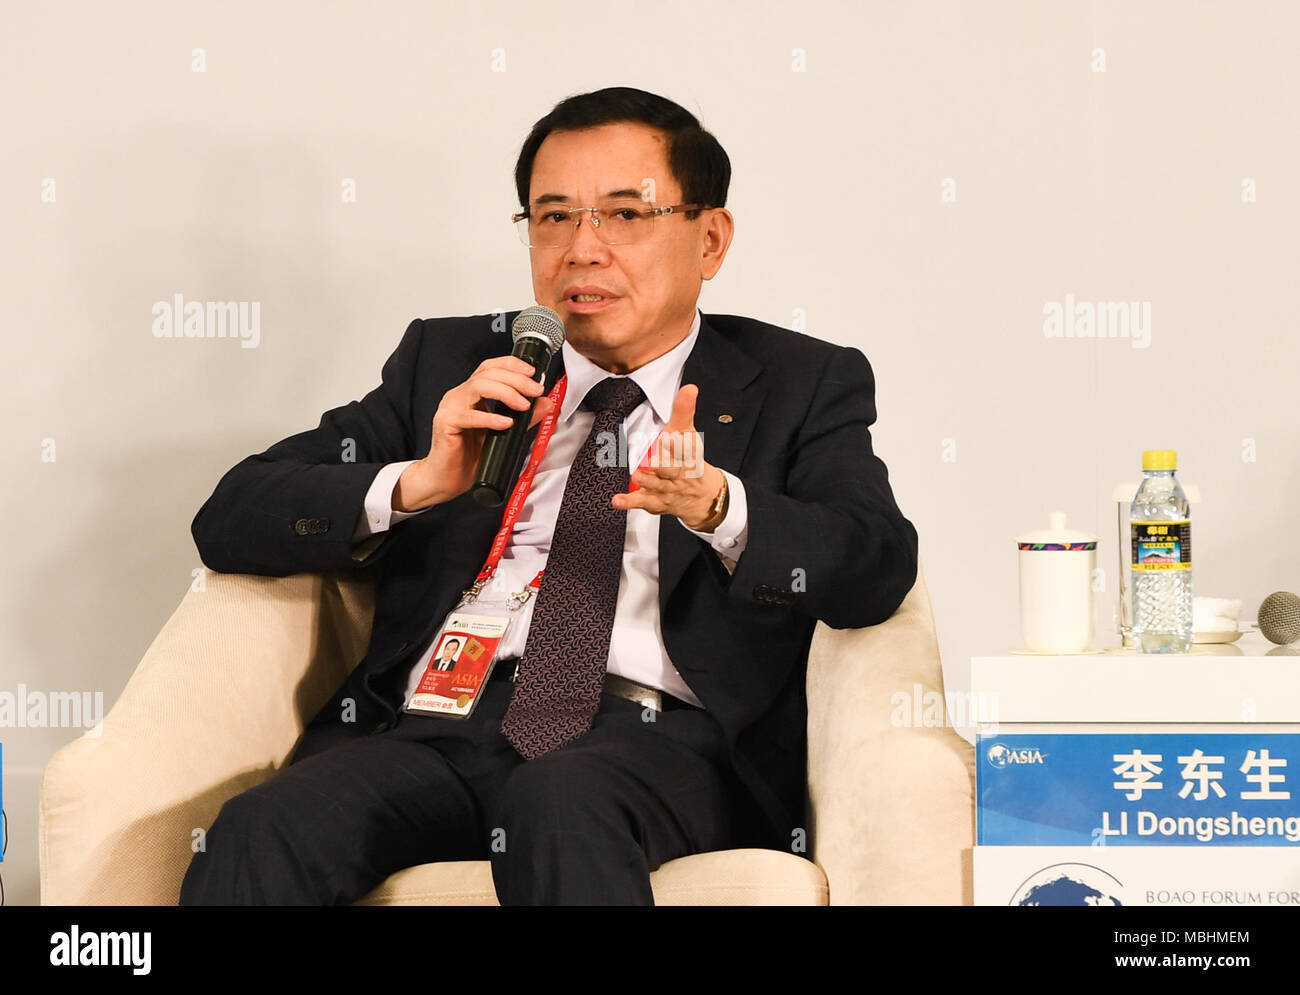 Boao, China's Hainan Province. 11th Apr, 2018. Li Dongsheng, chairman and CEO of TCL Cooperation, speaks at the session of 'The New Reform Agenda: Government vs the Market' during the Boao Forum for Asia Annual Conference 2018 in Boao, south China's Hainan Province, April 11, 2018. Credit: Yang Guanyu/Xinhua/Alamy Live News Stock Photo